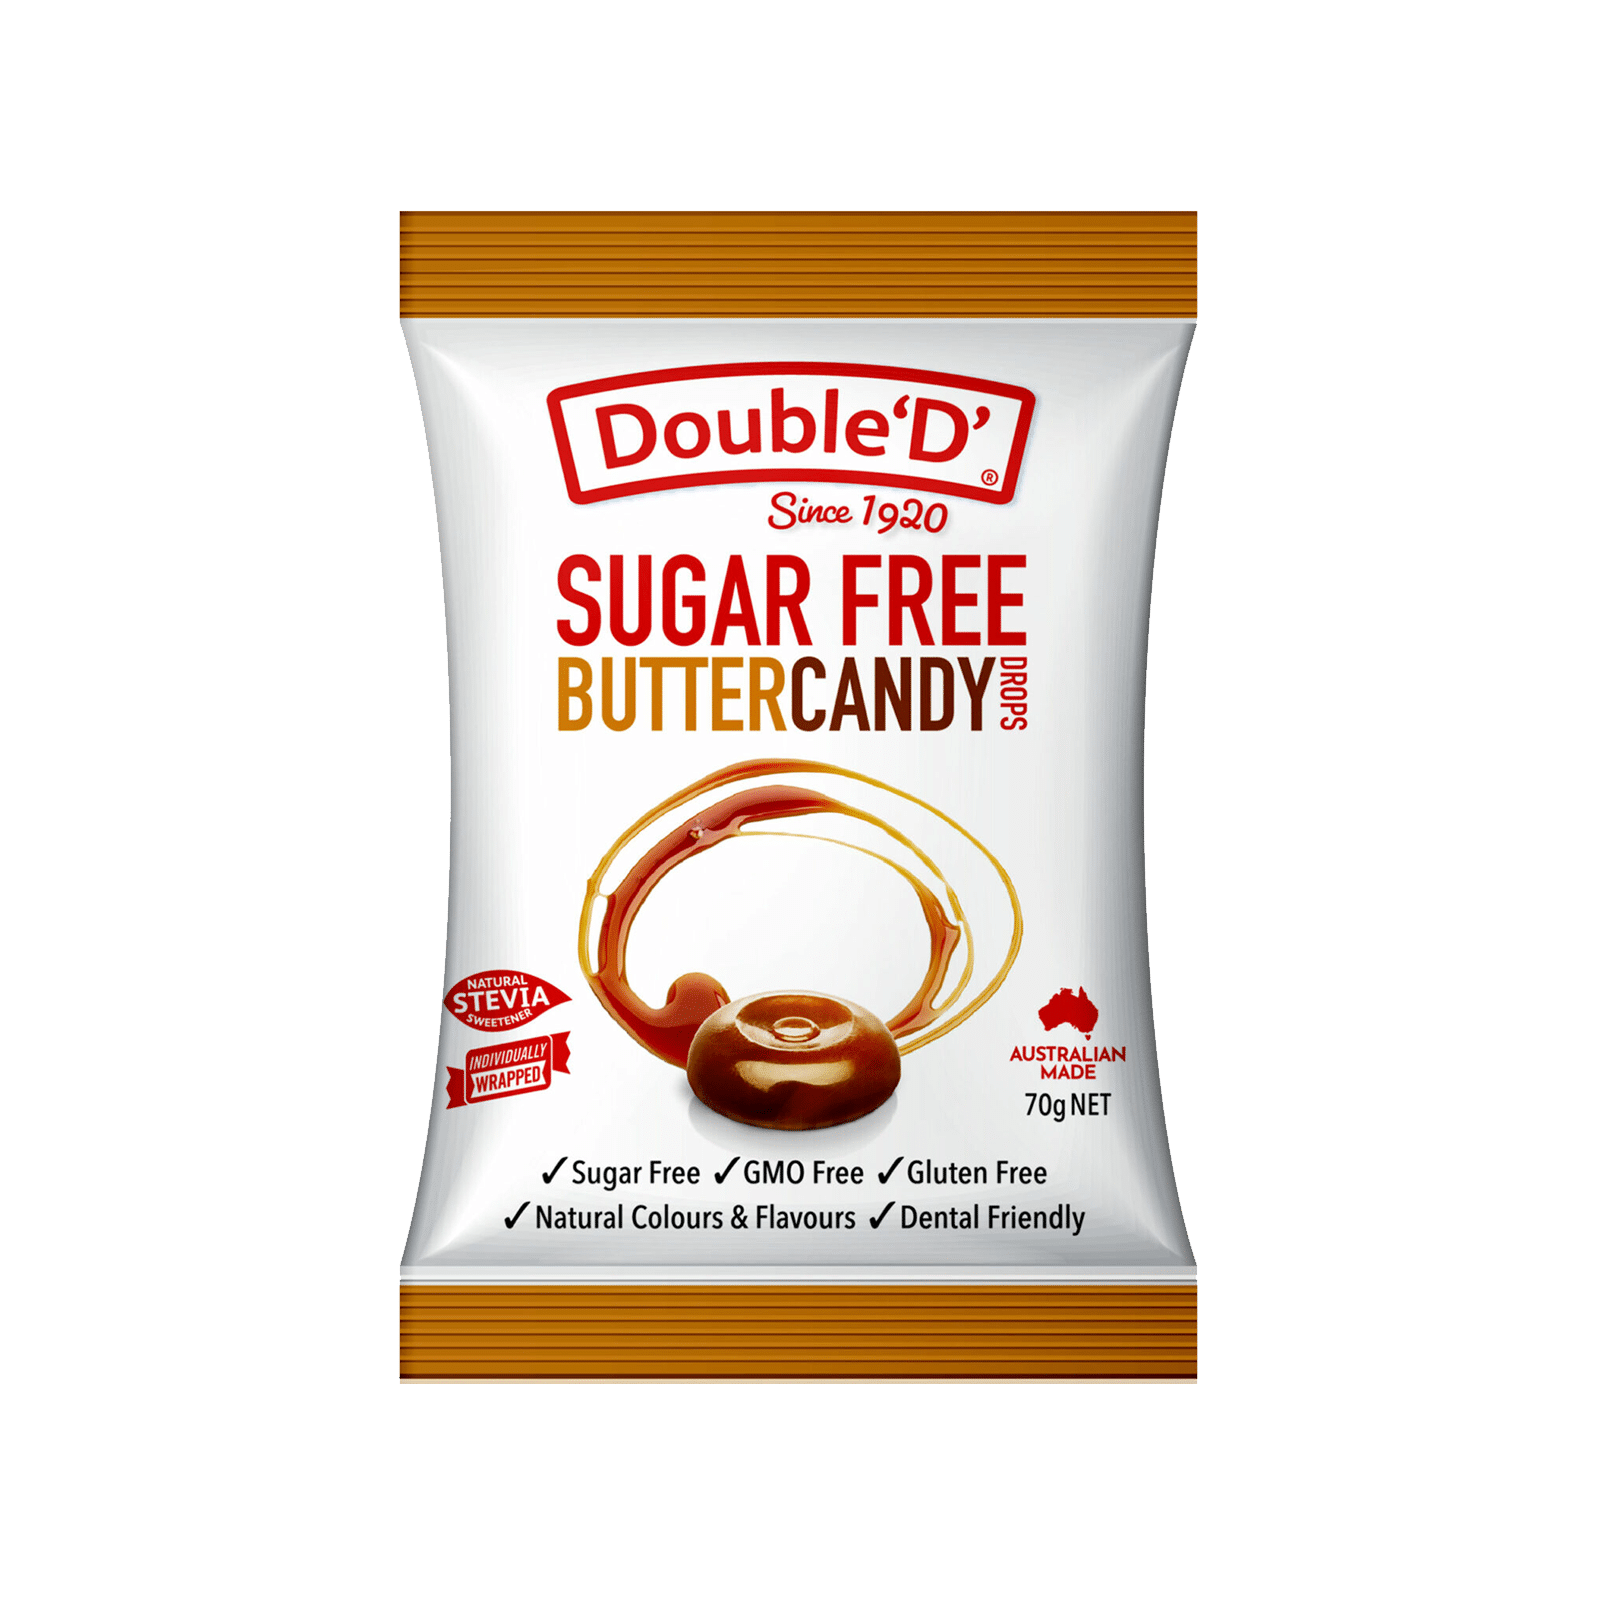 https://www.doubledproducts.com.au/wp-content/uploads/2022/08/product-double-d-sugar-free-butter-candy-70g.png